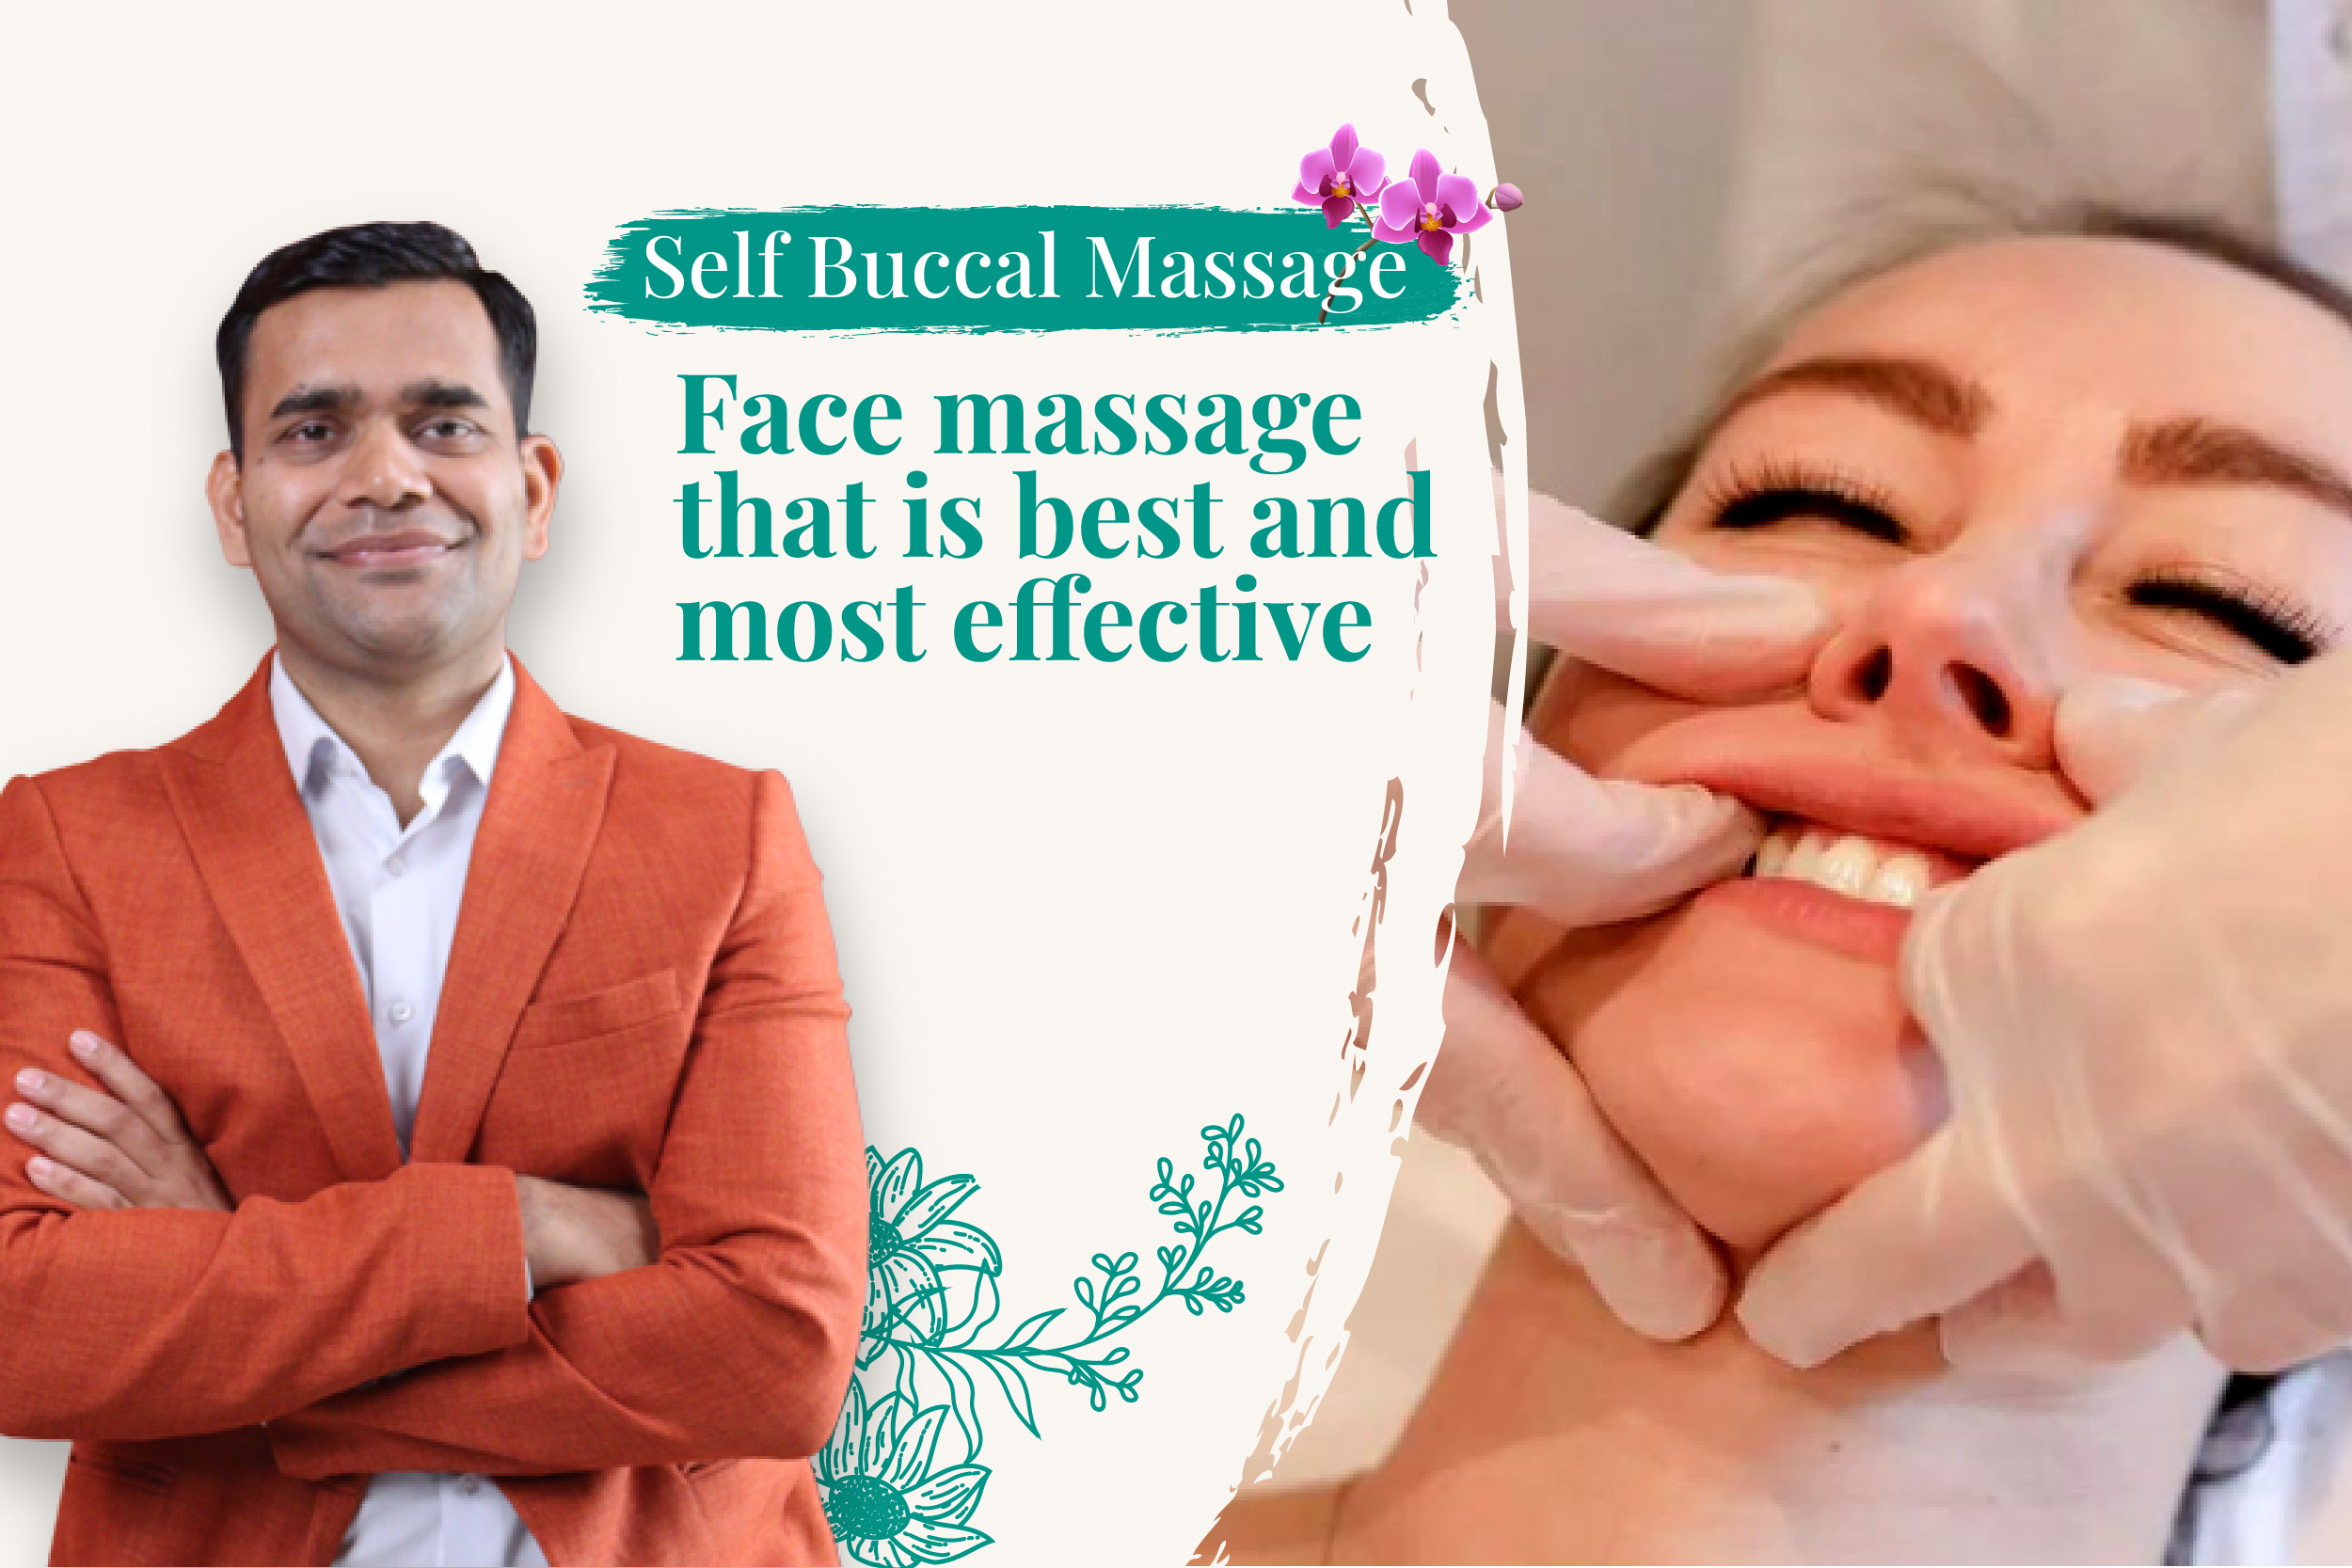 Self Buccal Massage Online Course – Face Massage That is Best and Most Effective.